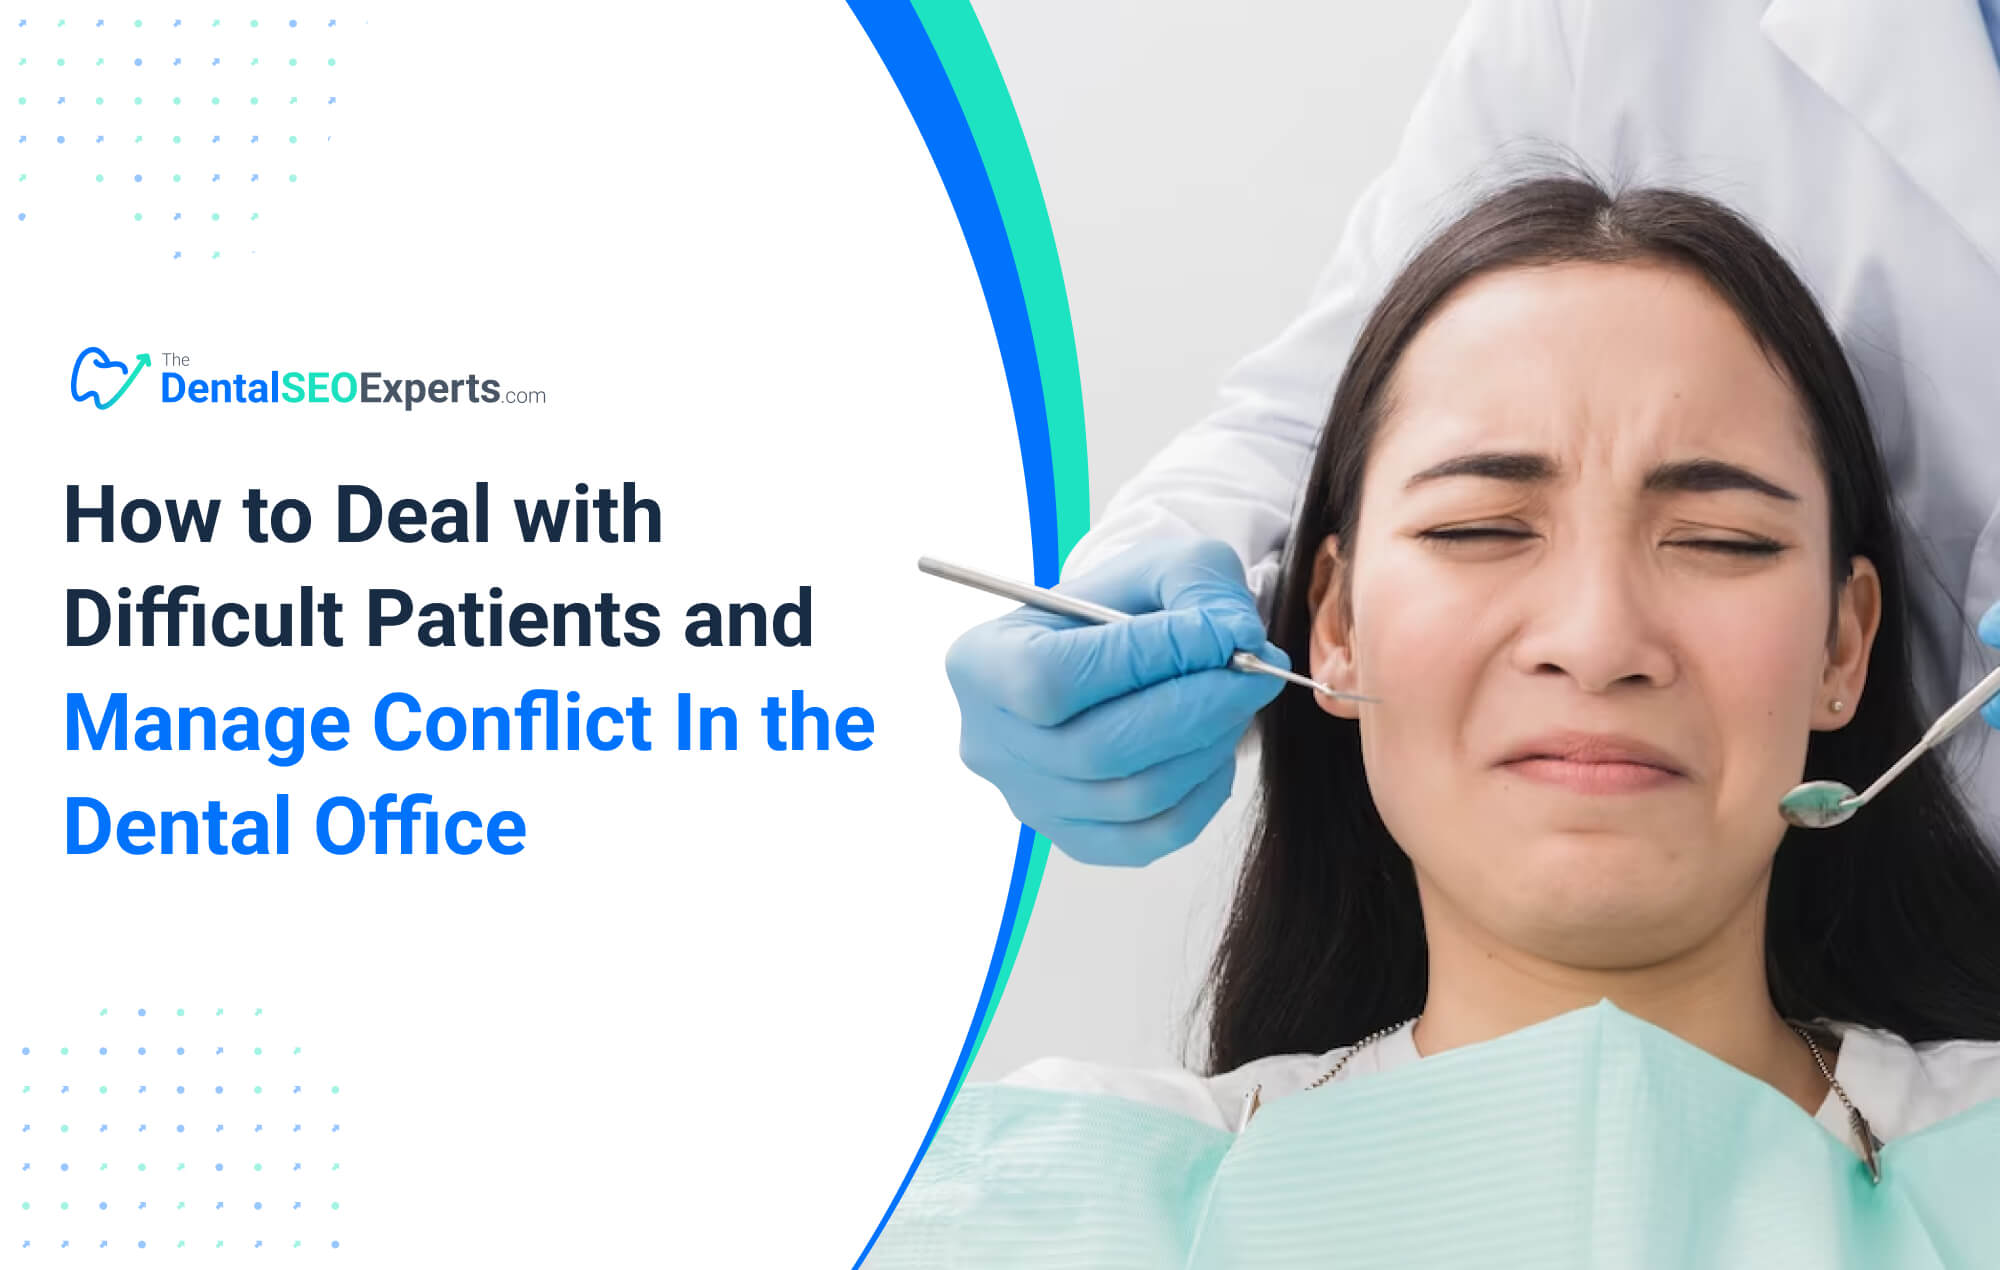 How to Deal with Difficult Patients and Manage Conflict In the Dental Office